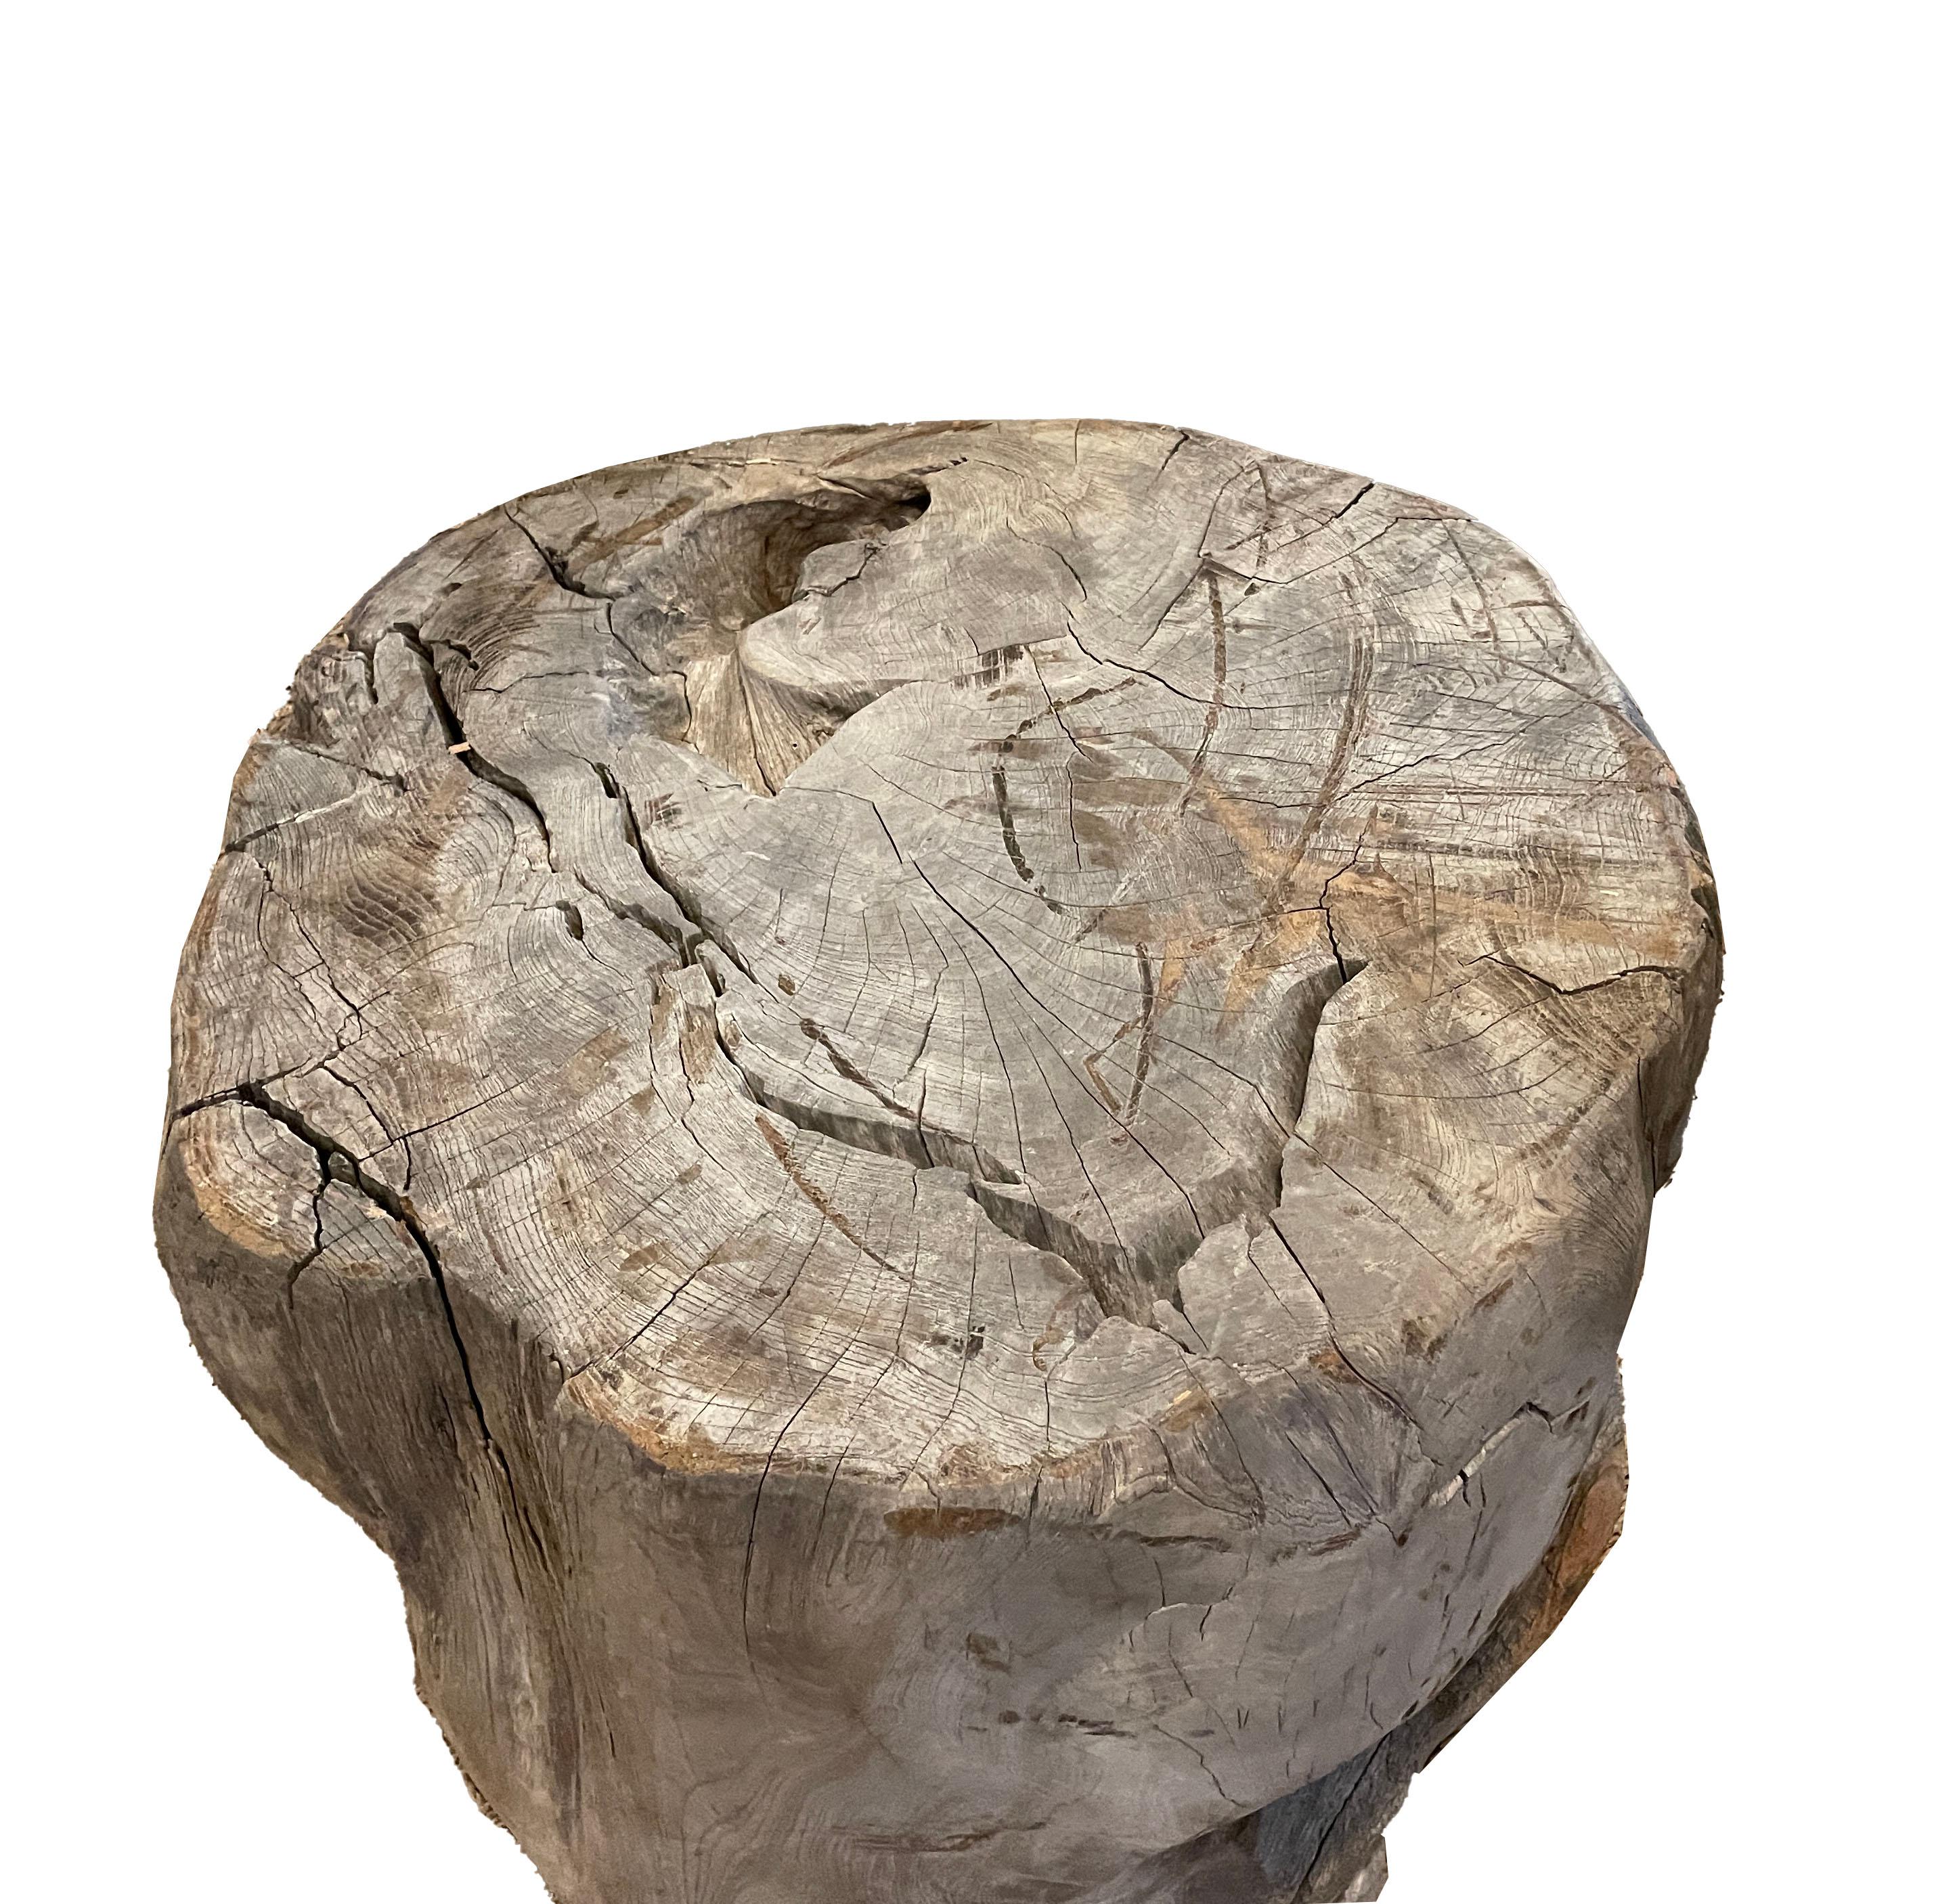 Lovely vintage grey weathered teak root table. This table is a good size for a side table or small cocktail table.